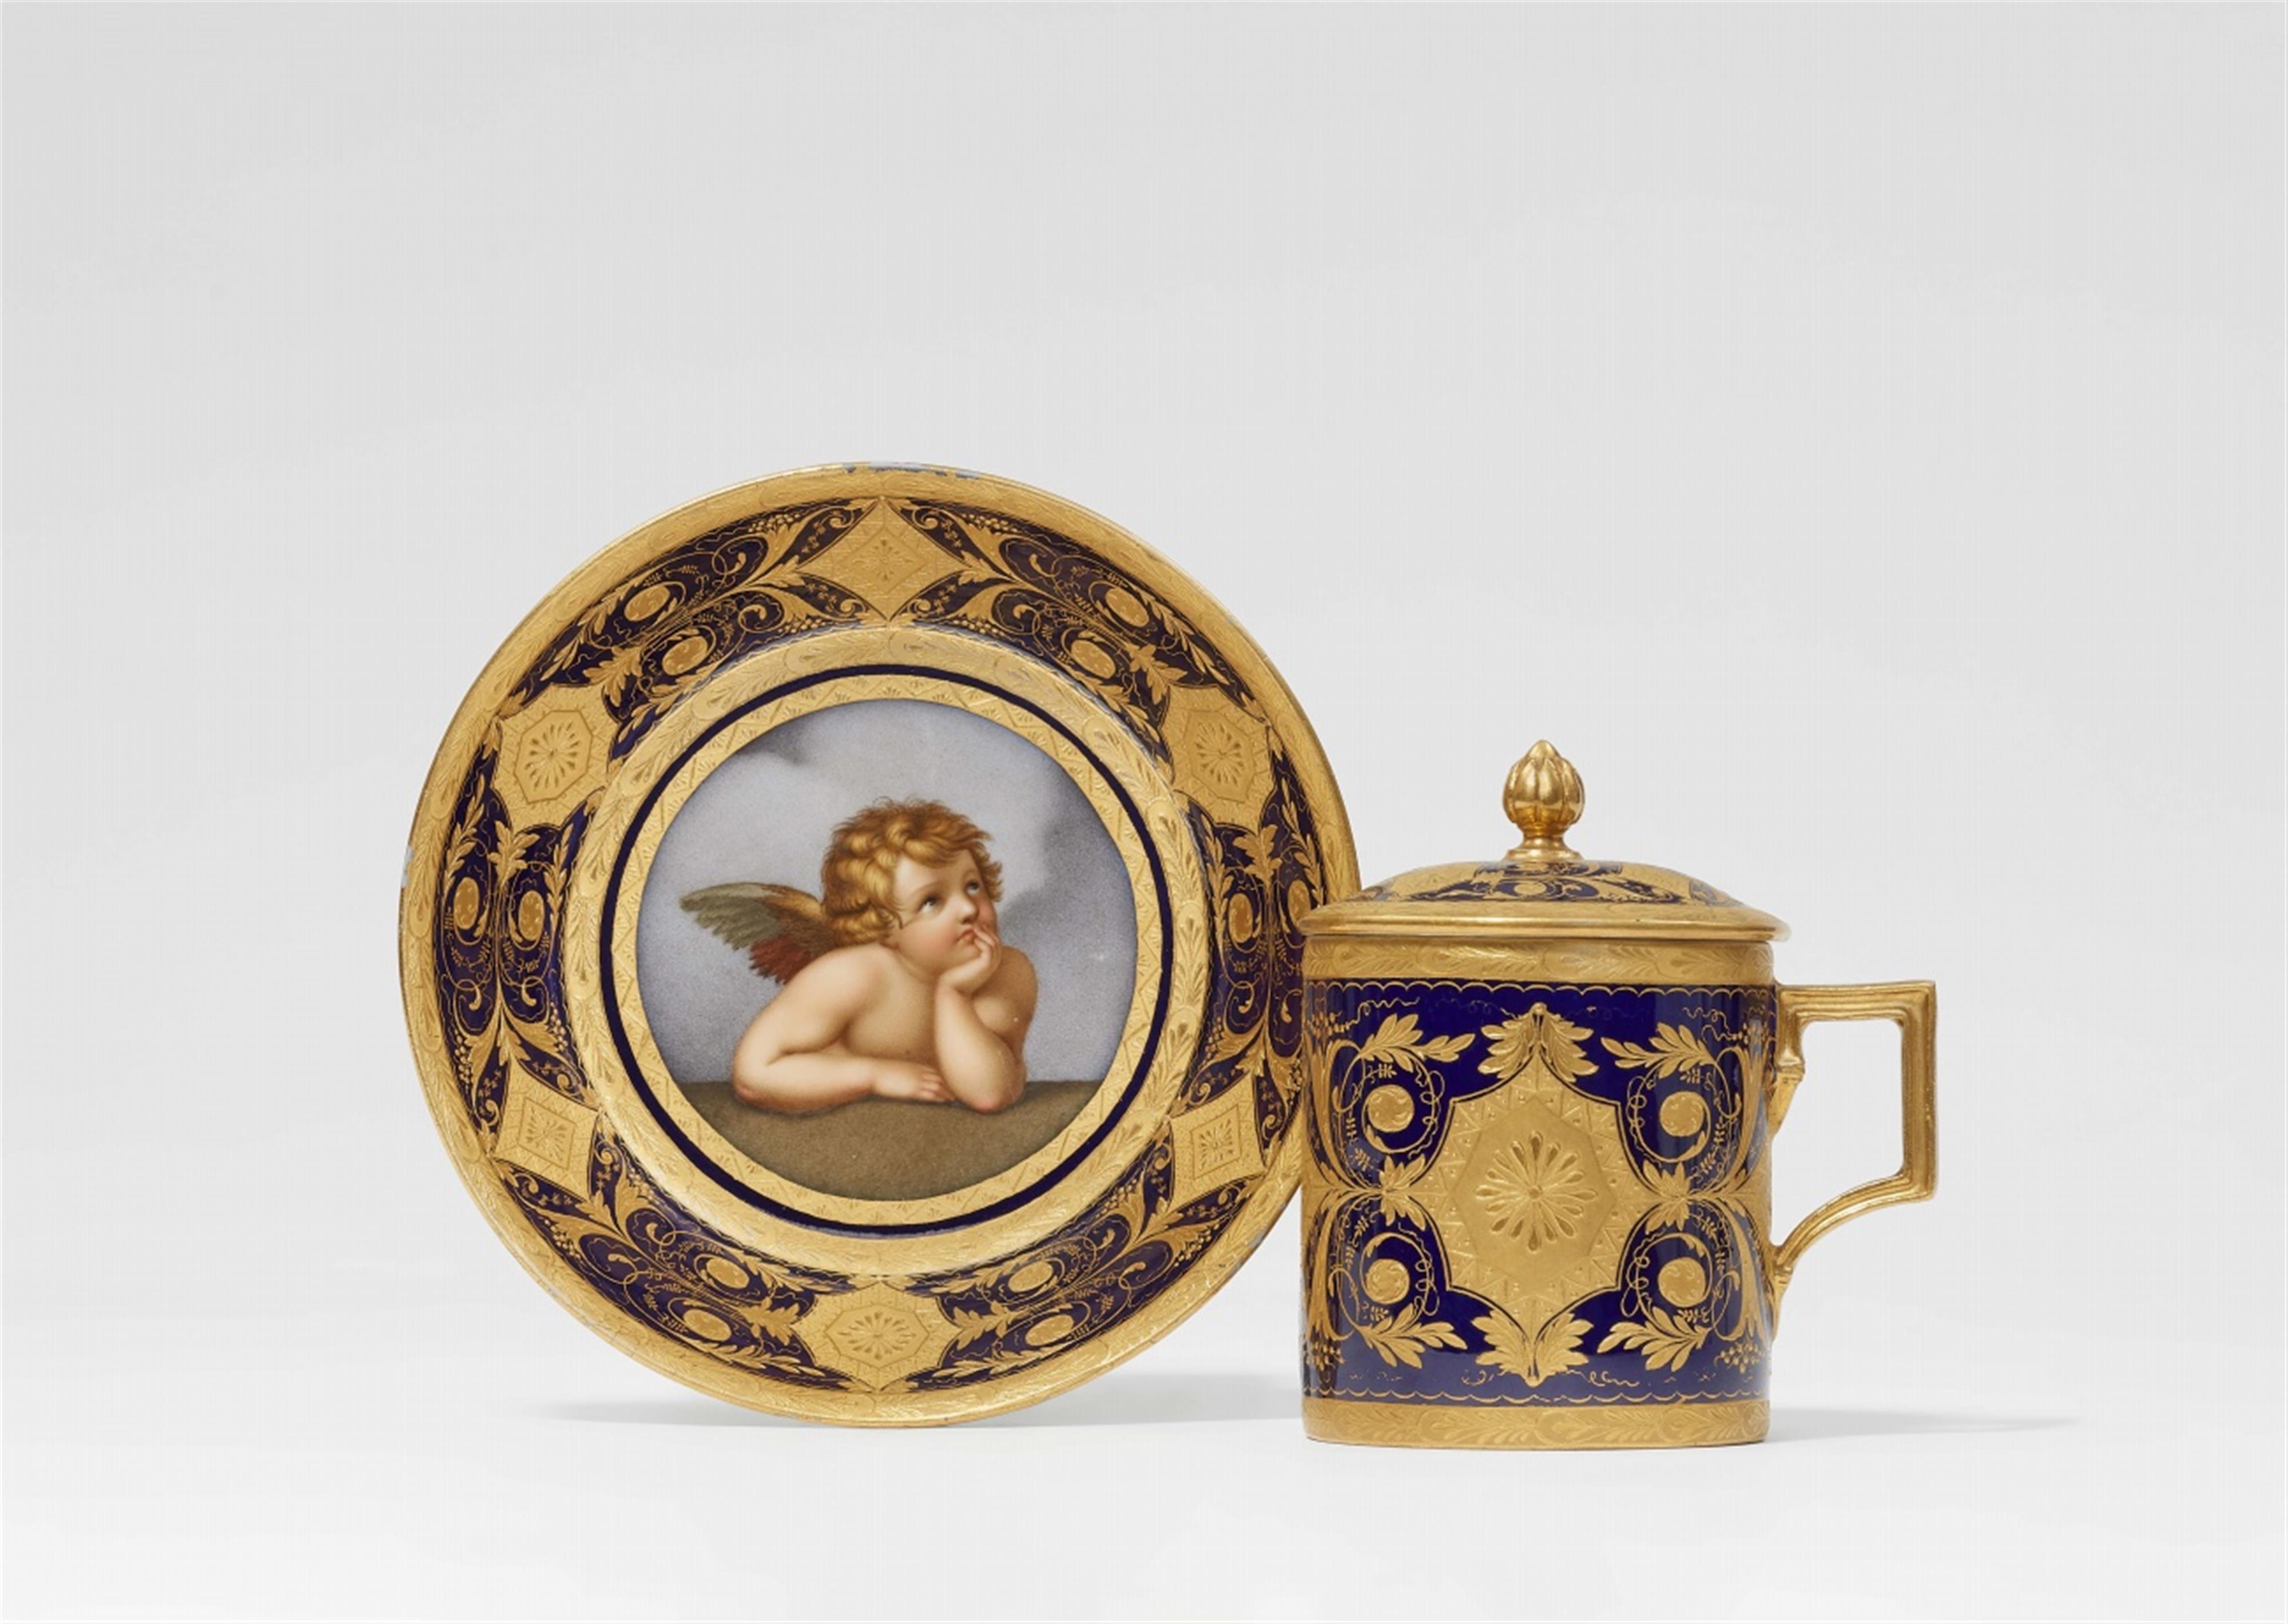 A Meissen porcelain cup and saucer with the angel from Raphael's Sixtine Madonna - image-1